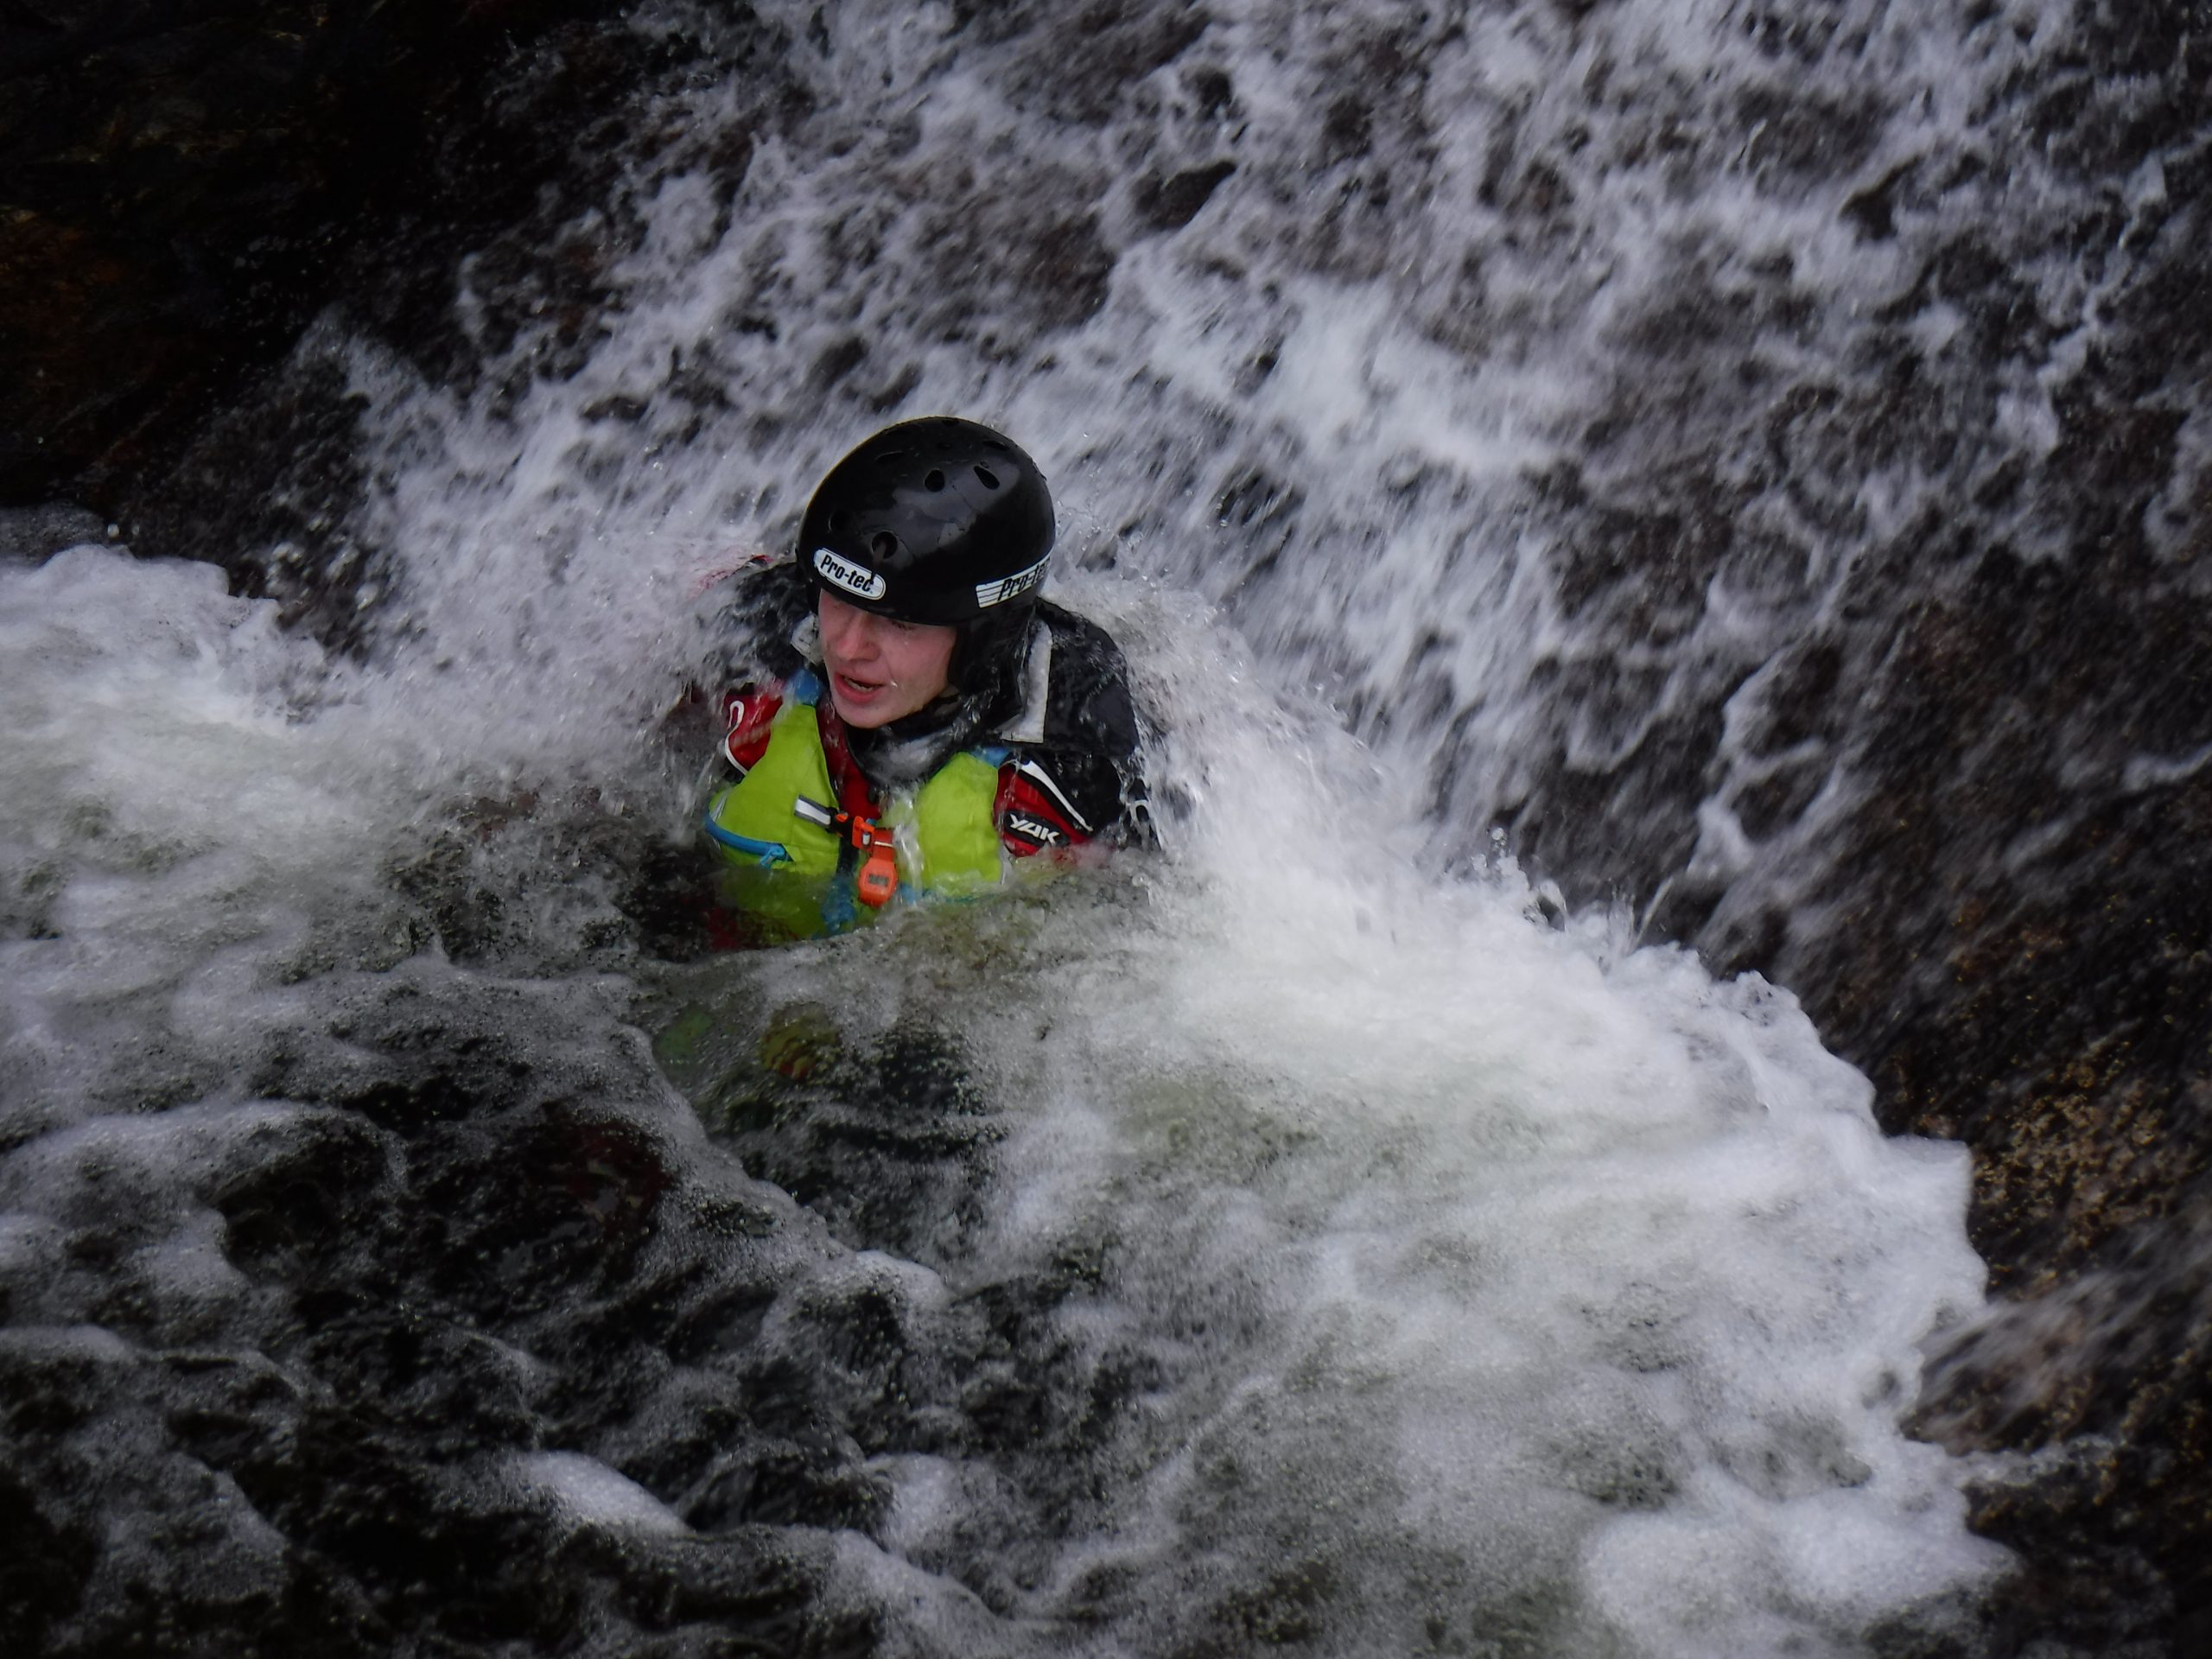 A child submerged in a waterfall during gorge walking activity